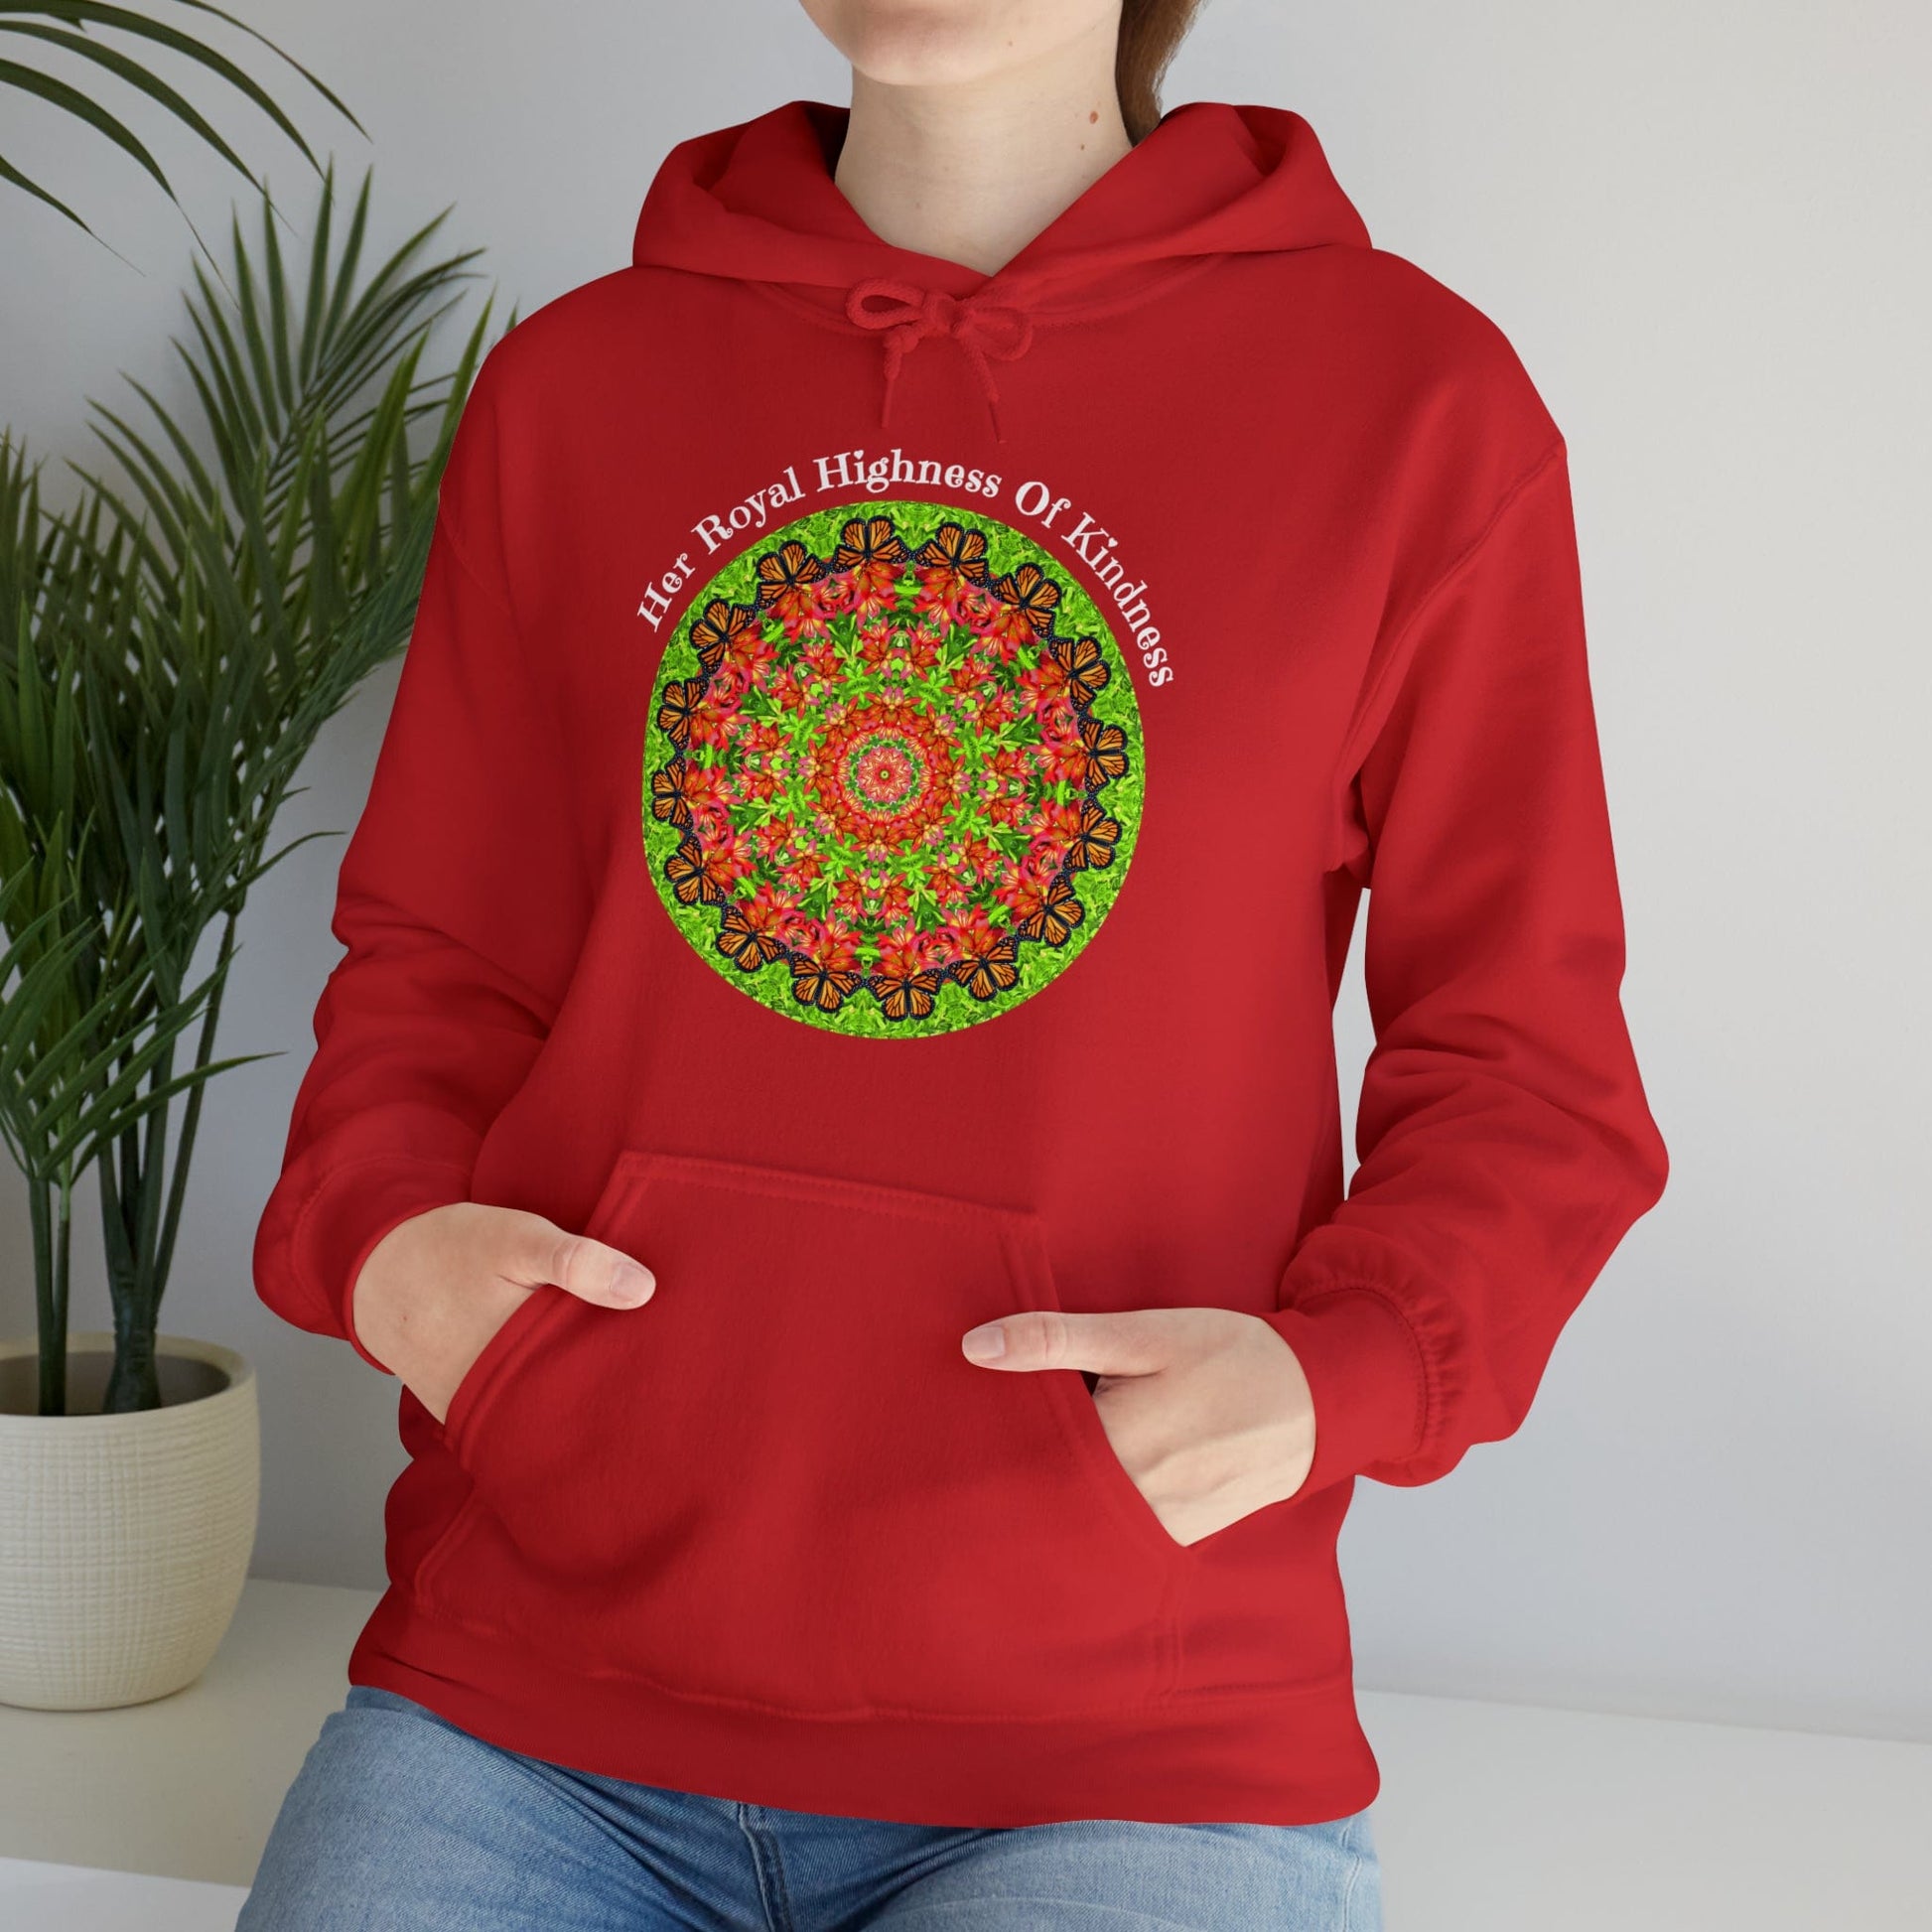 Pretty & Cute Butterfly Kindness Graphic Hoodie Sweatshirt Monarch Butterfly Mandala Art Her Royal Highness Of Kindness red